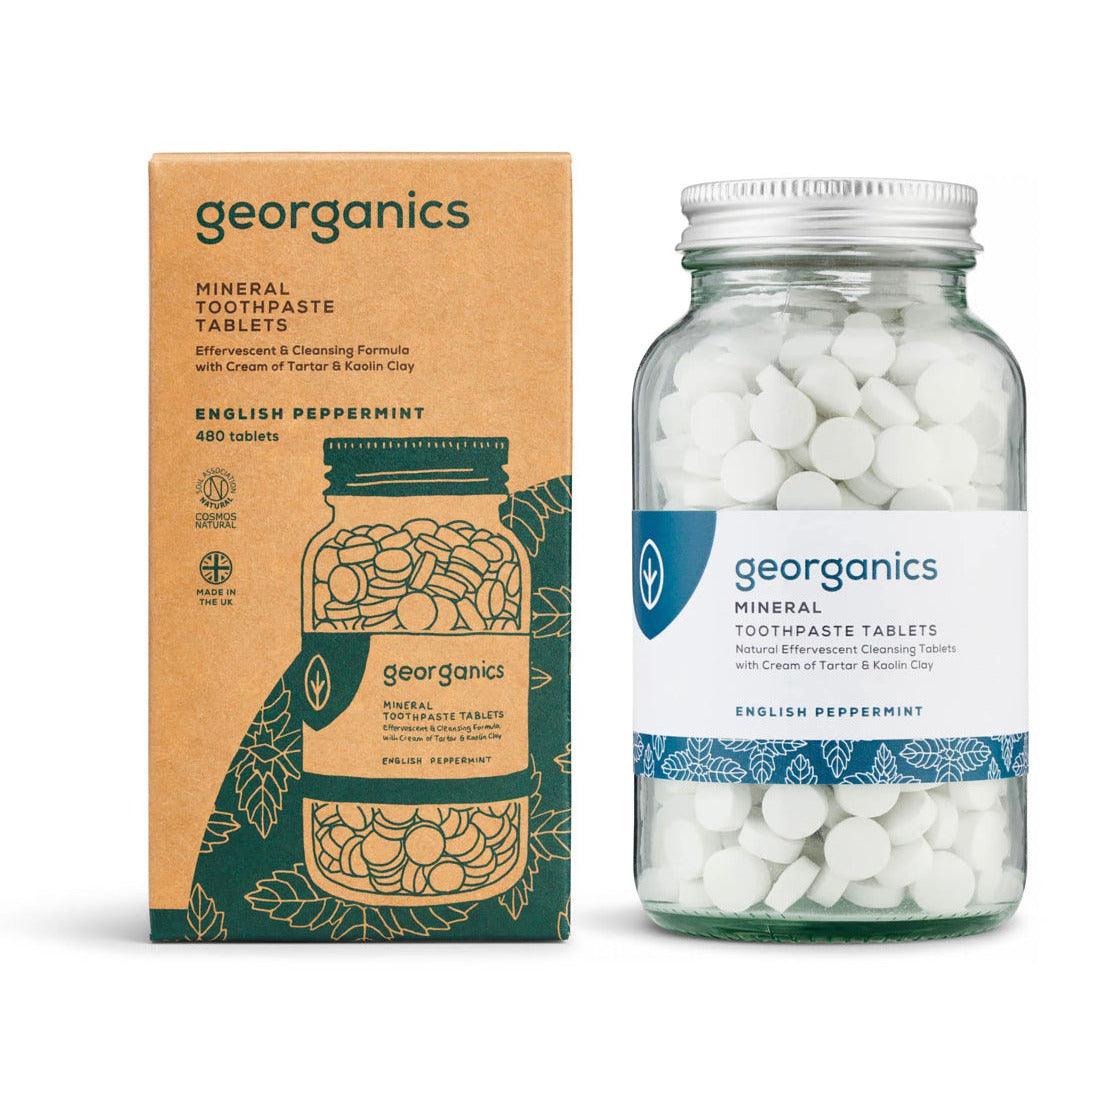 Mineral Toothpaste Tablets by Georganics, English Peppermint - Ninth & Pine